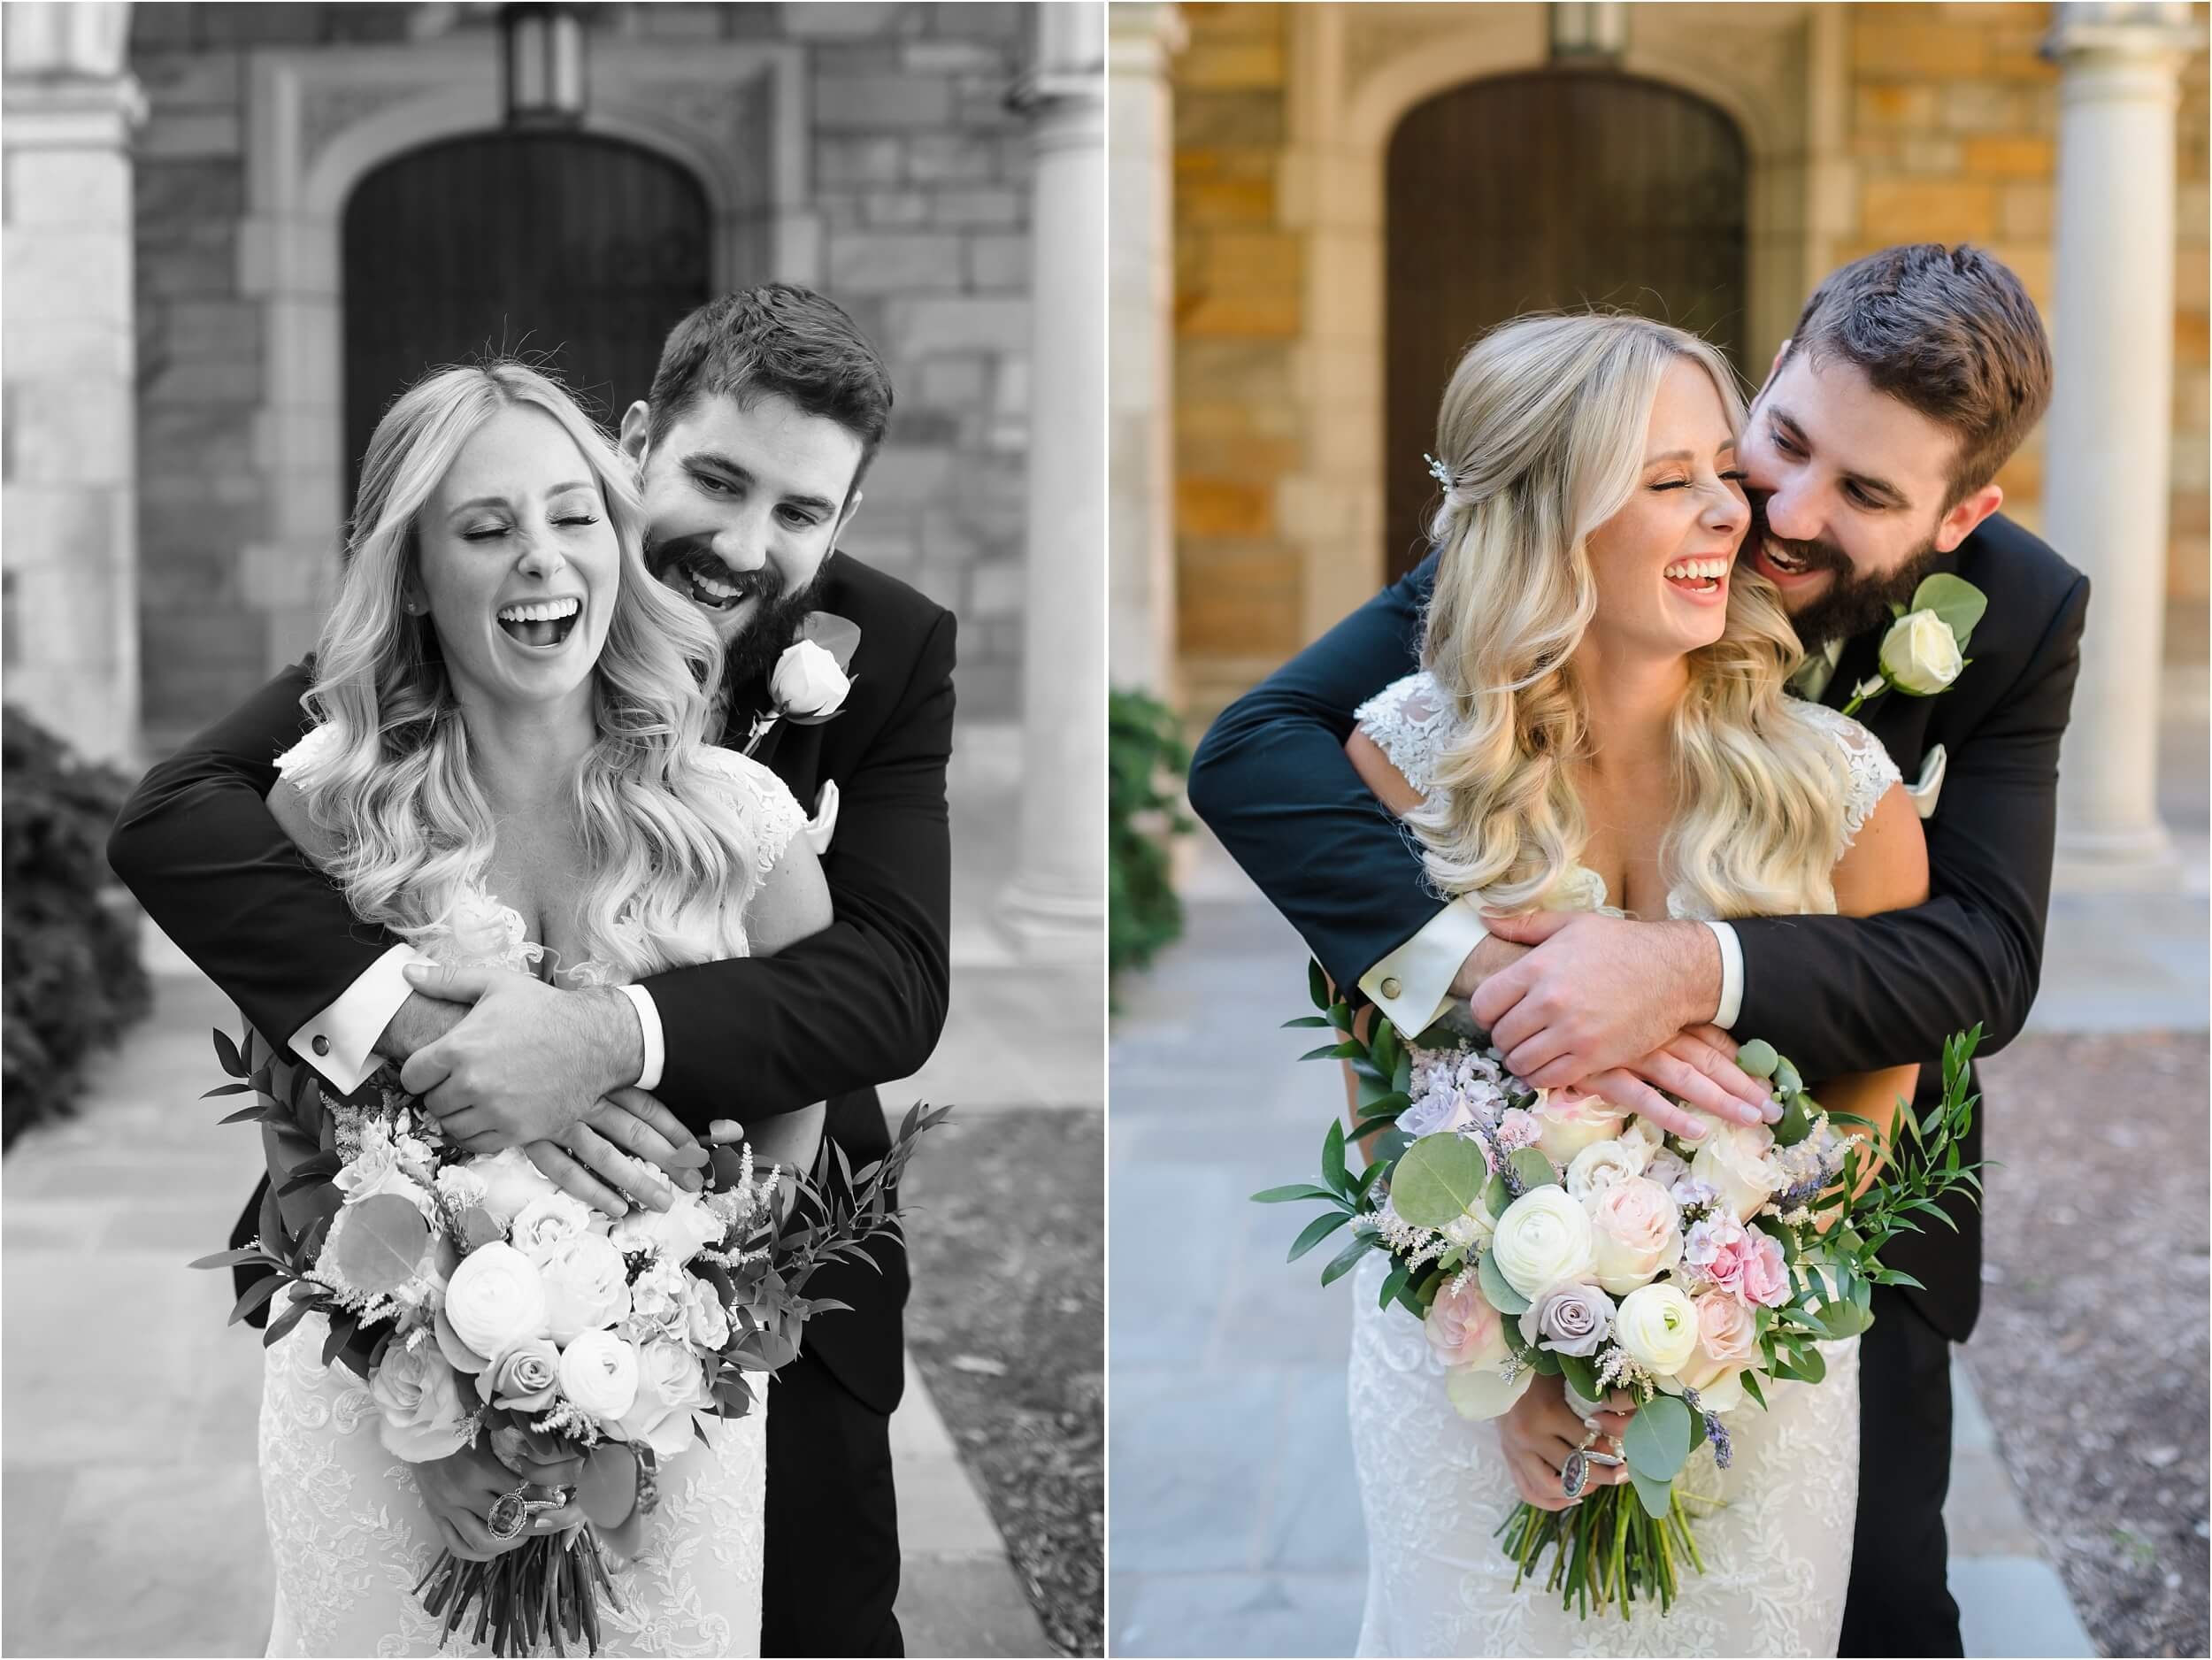  A groom surprises his bride with a hug from behind during their portraits.  